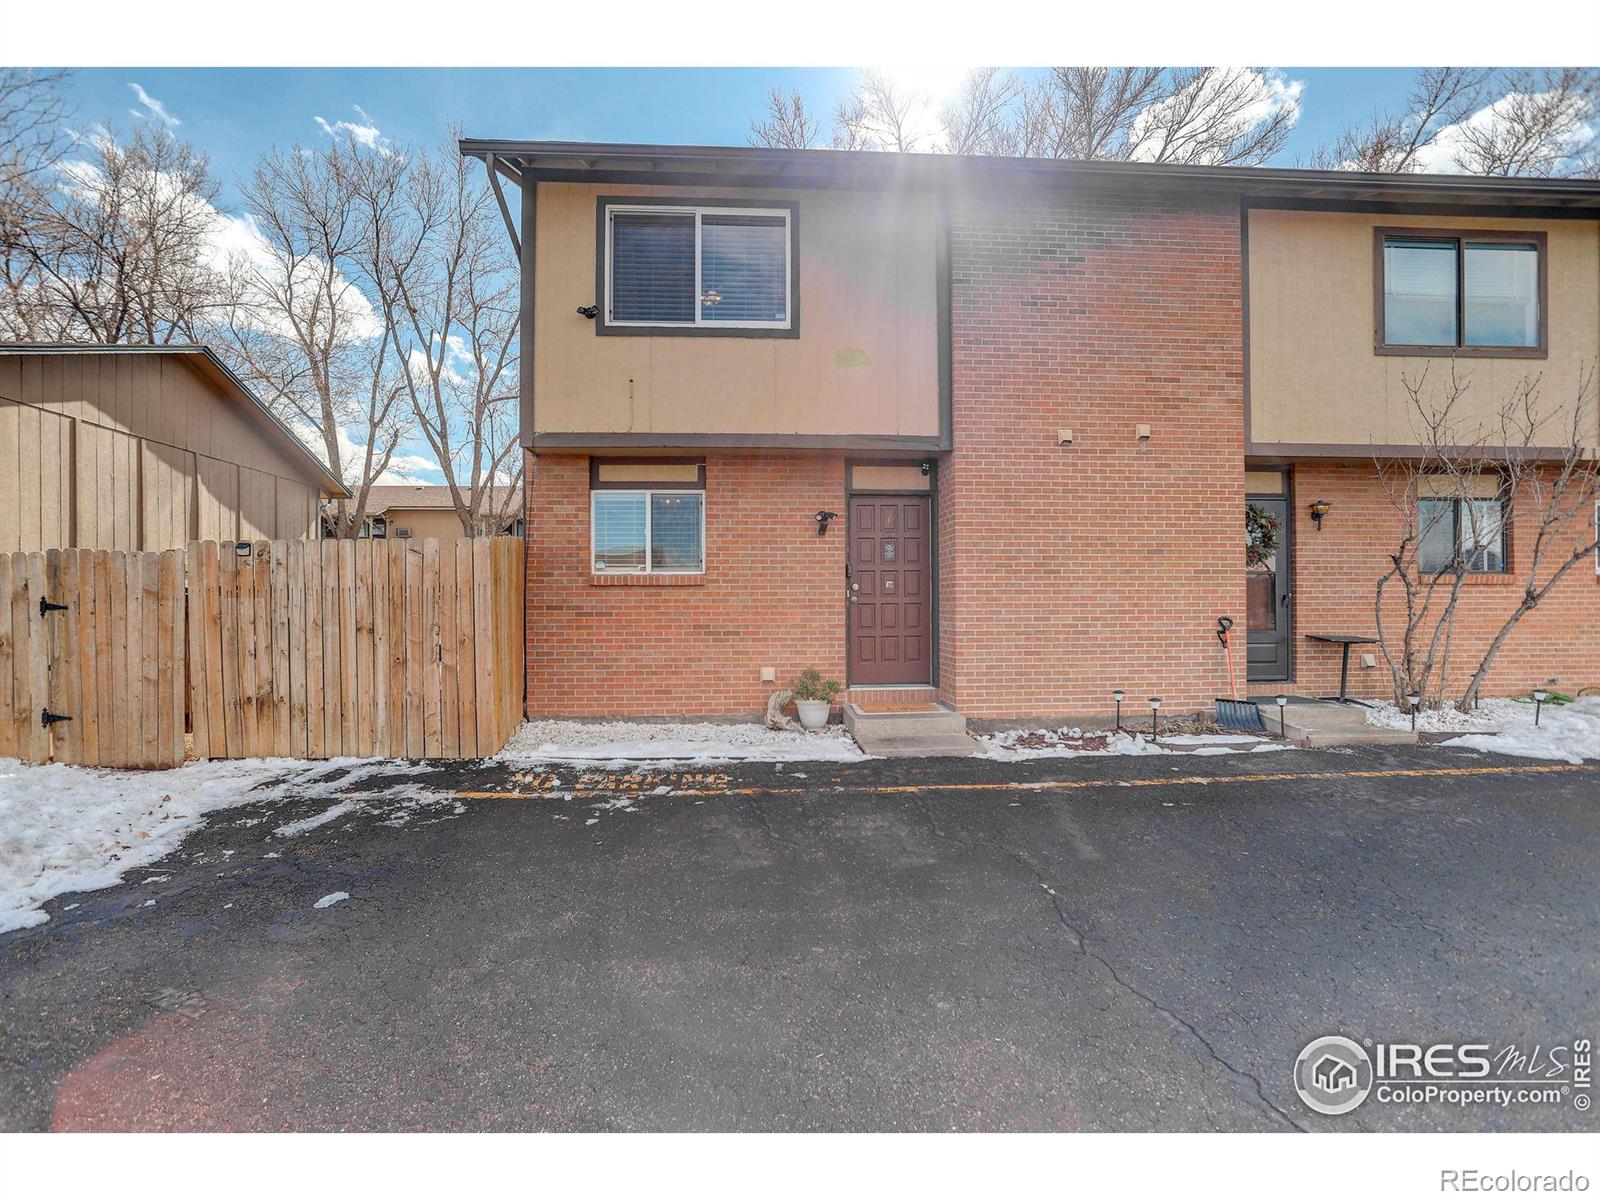 Report Image for 1736  Palm Drive,Fort Collins, Colorado